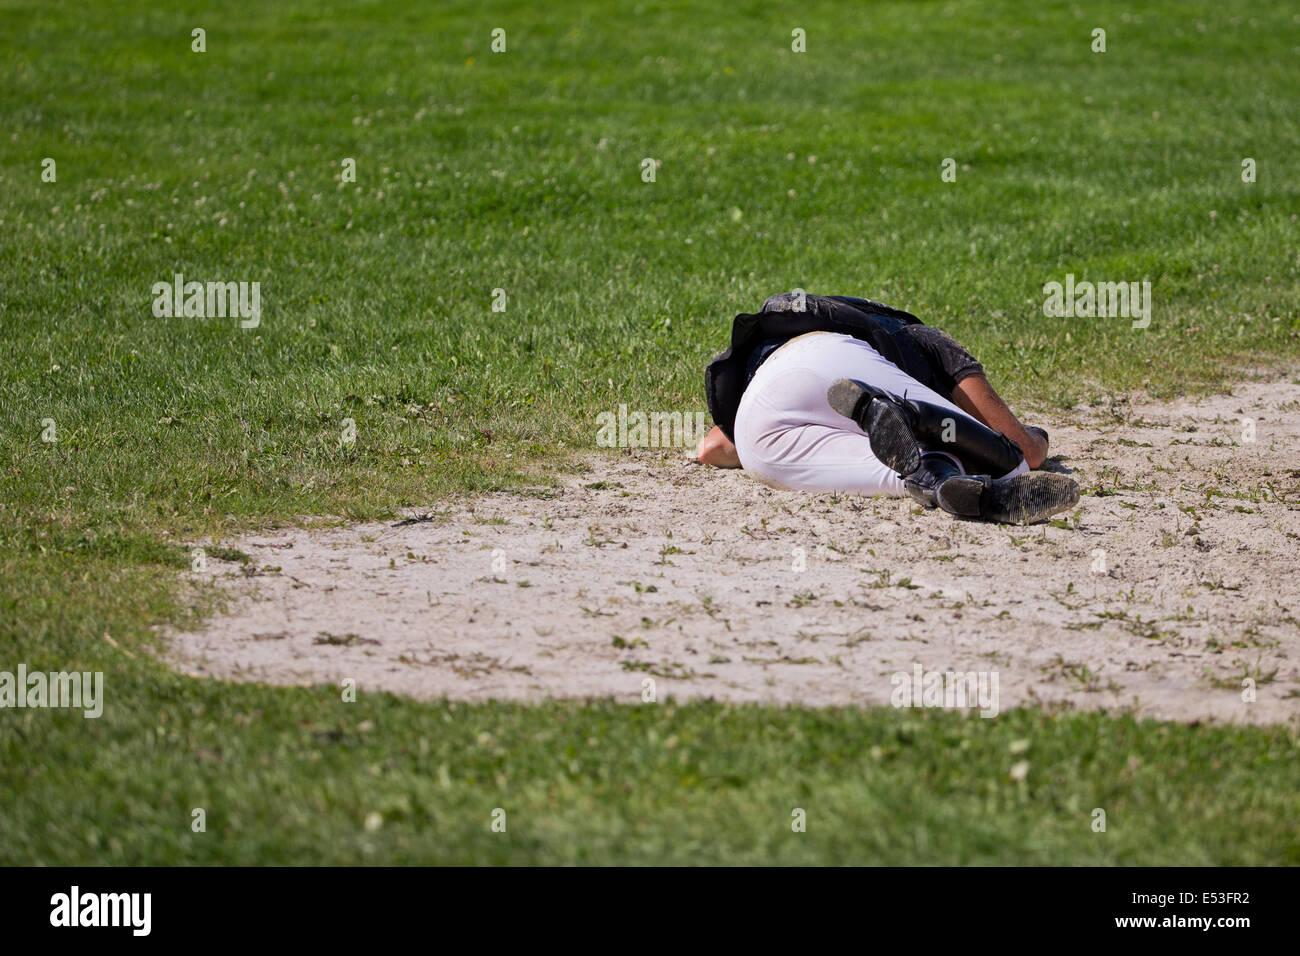 Aachen, Germany. 19th July, 2014. New Zealand rider Lucy Jackson lies on the ground after her fall during the cross-country discipline of the eventing event of the CHIO in Aachen, Germany, 19 July 2014. Photo: ROLF VENNENBERND/DPA/Alamy Live News Stock Photo